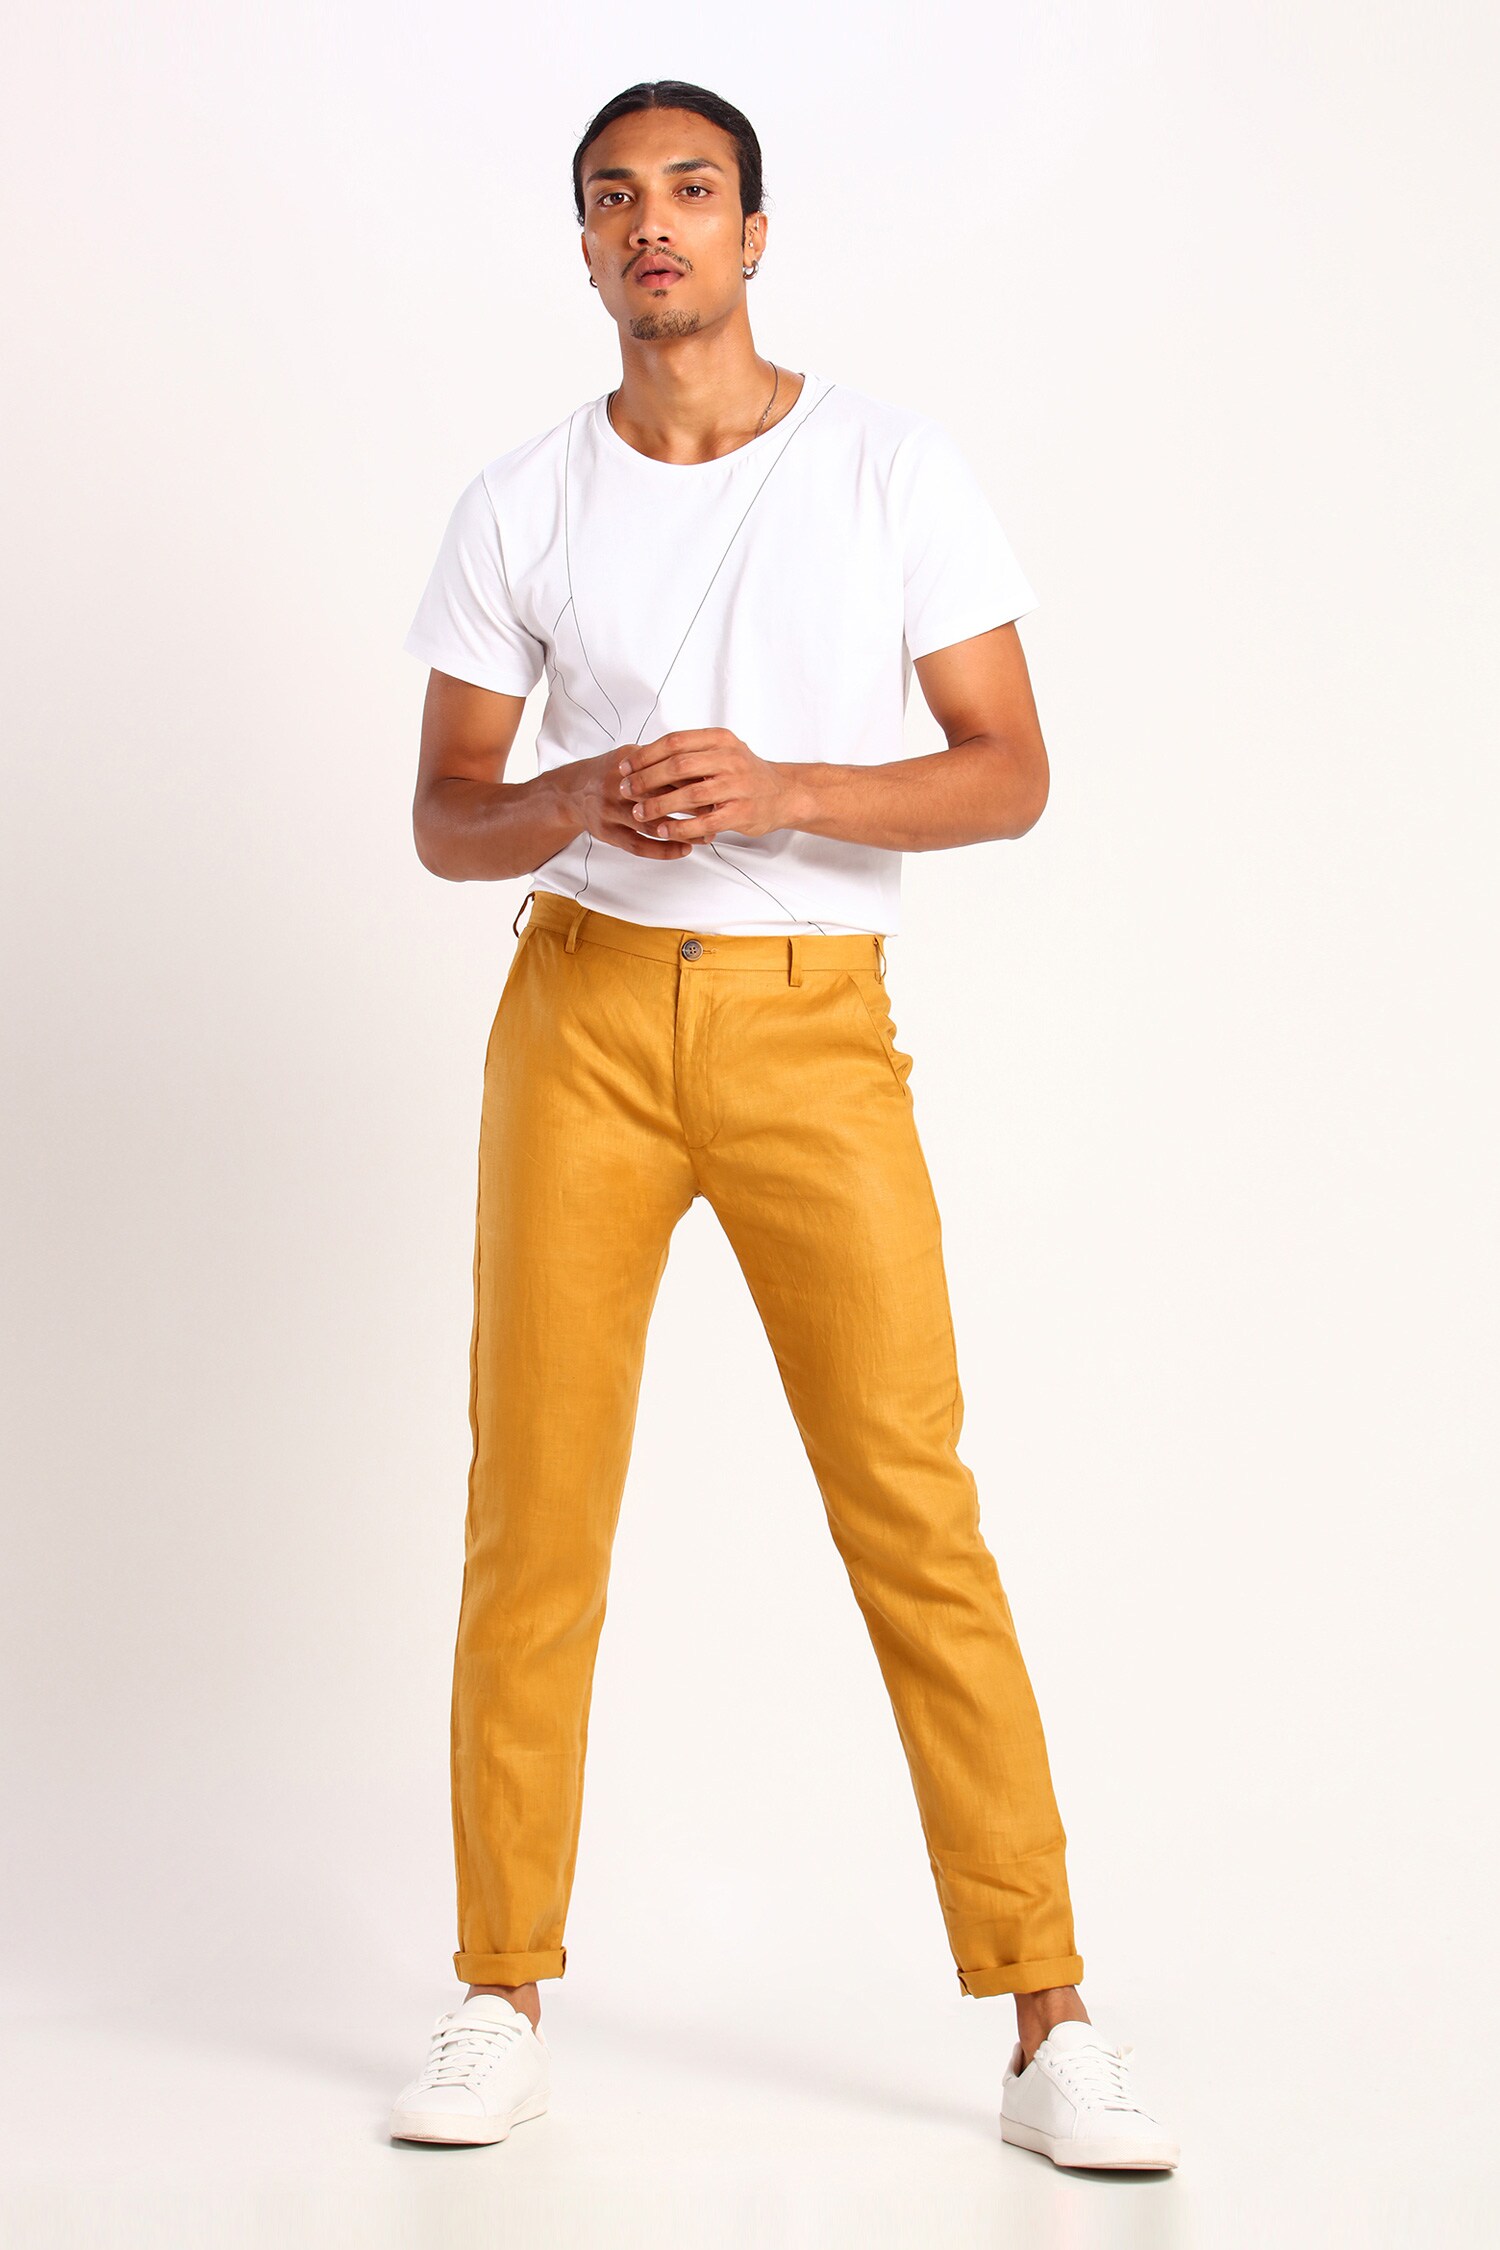 Mustard Trousers and Blue Zipper Outfit for men ⋆ Best Fashion Blog For Men  - TheUnstitchd.com